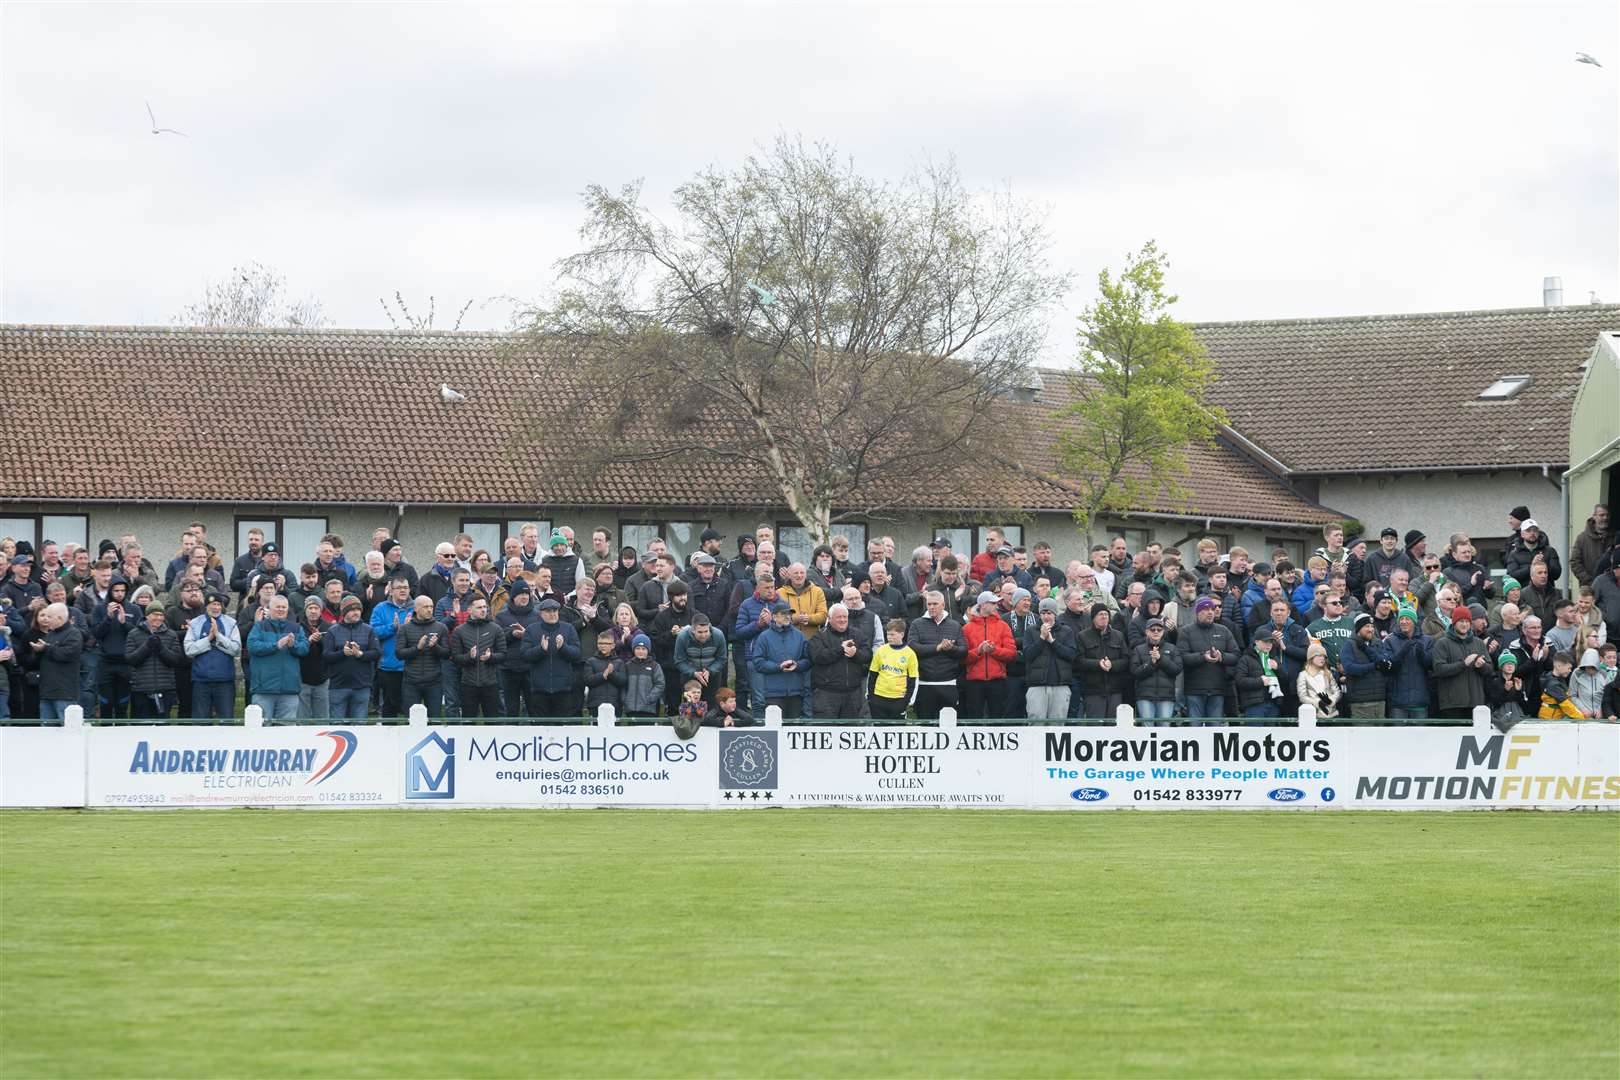 Buckie Thistle fans before kick-off...Buckie Thistle F.C. v Brechin City F.C. Highland League Final at Victoria Park. ..Picture: Beth Taylor.